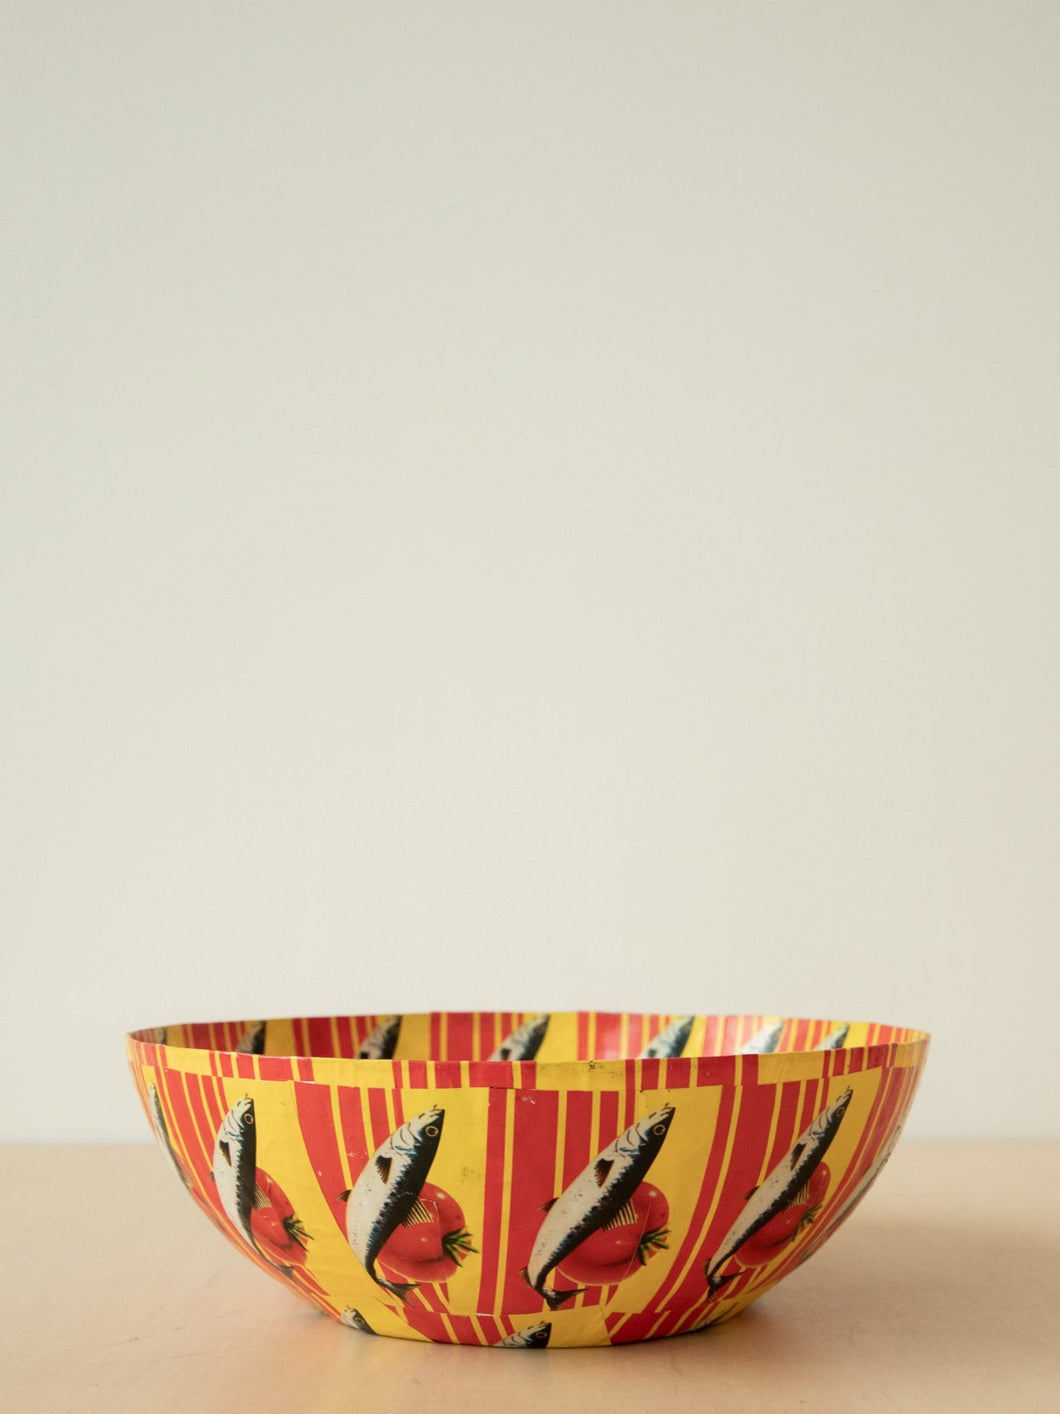 South African Label Bowls